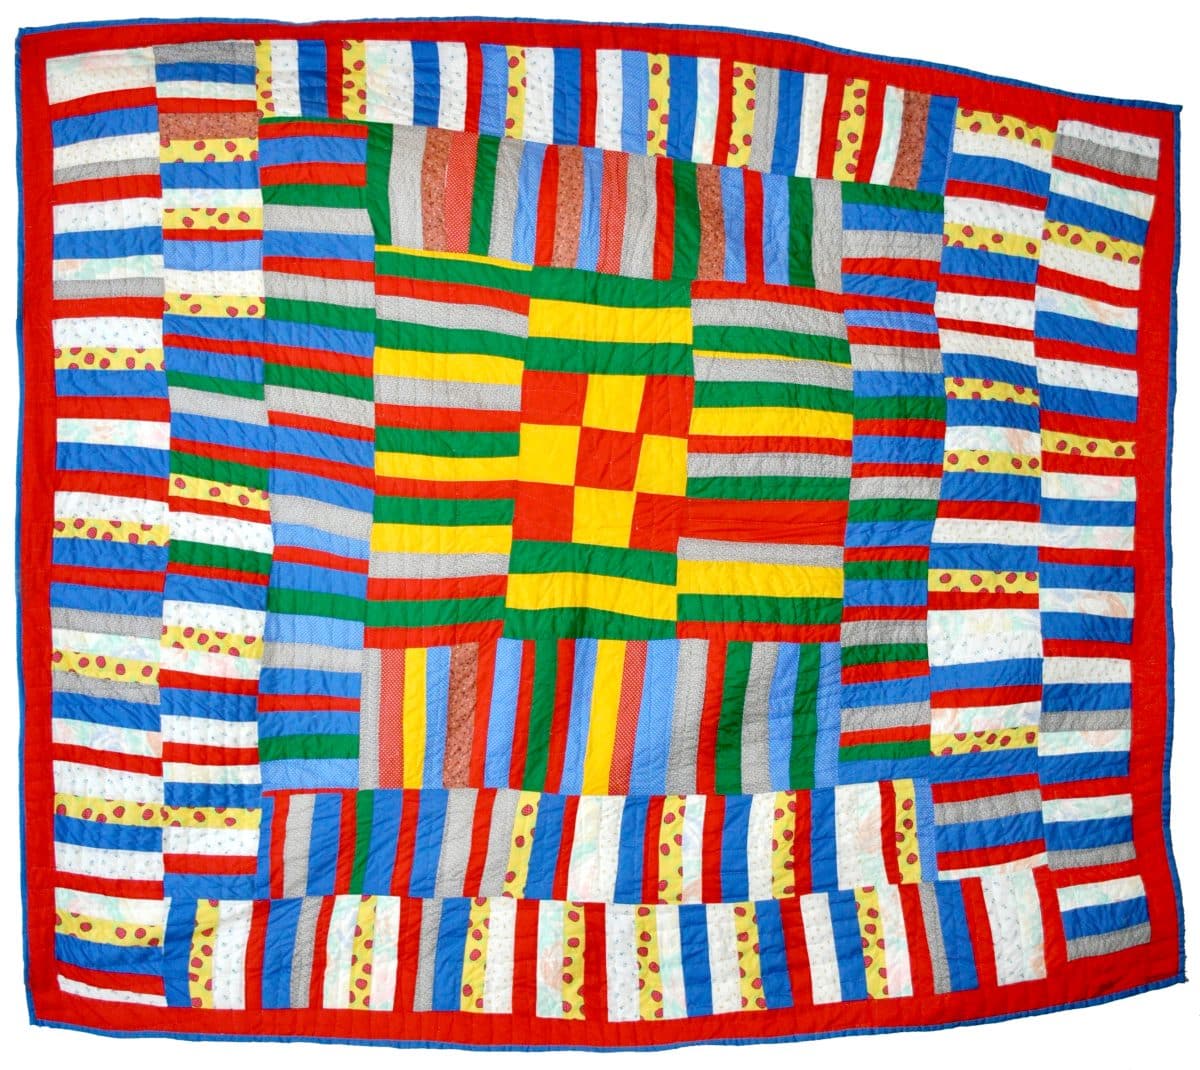 image of a gee's bend quilt, red, blue, yellows and greens by Gee's bend quilters